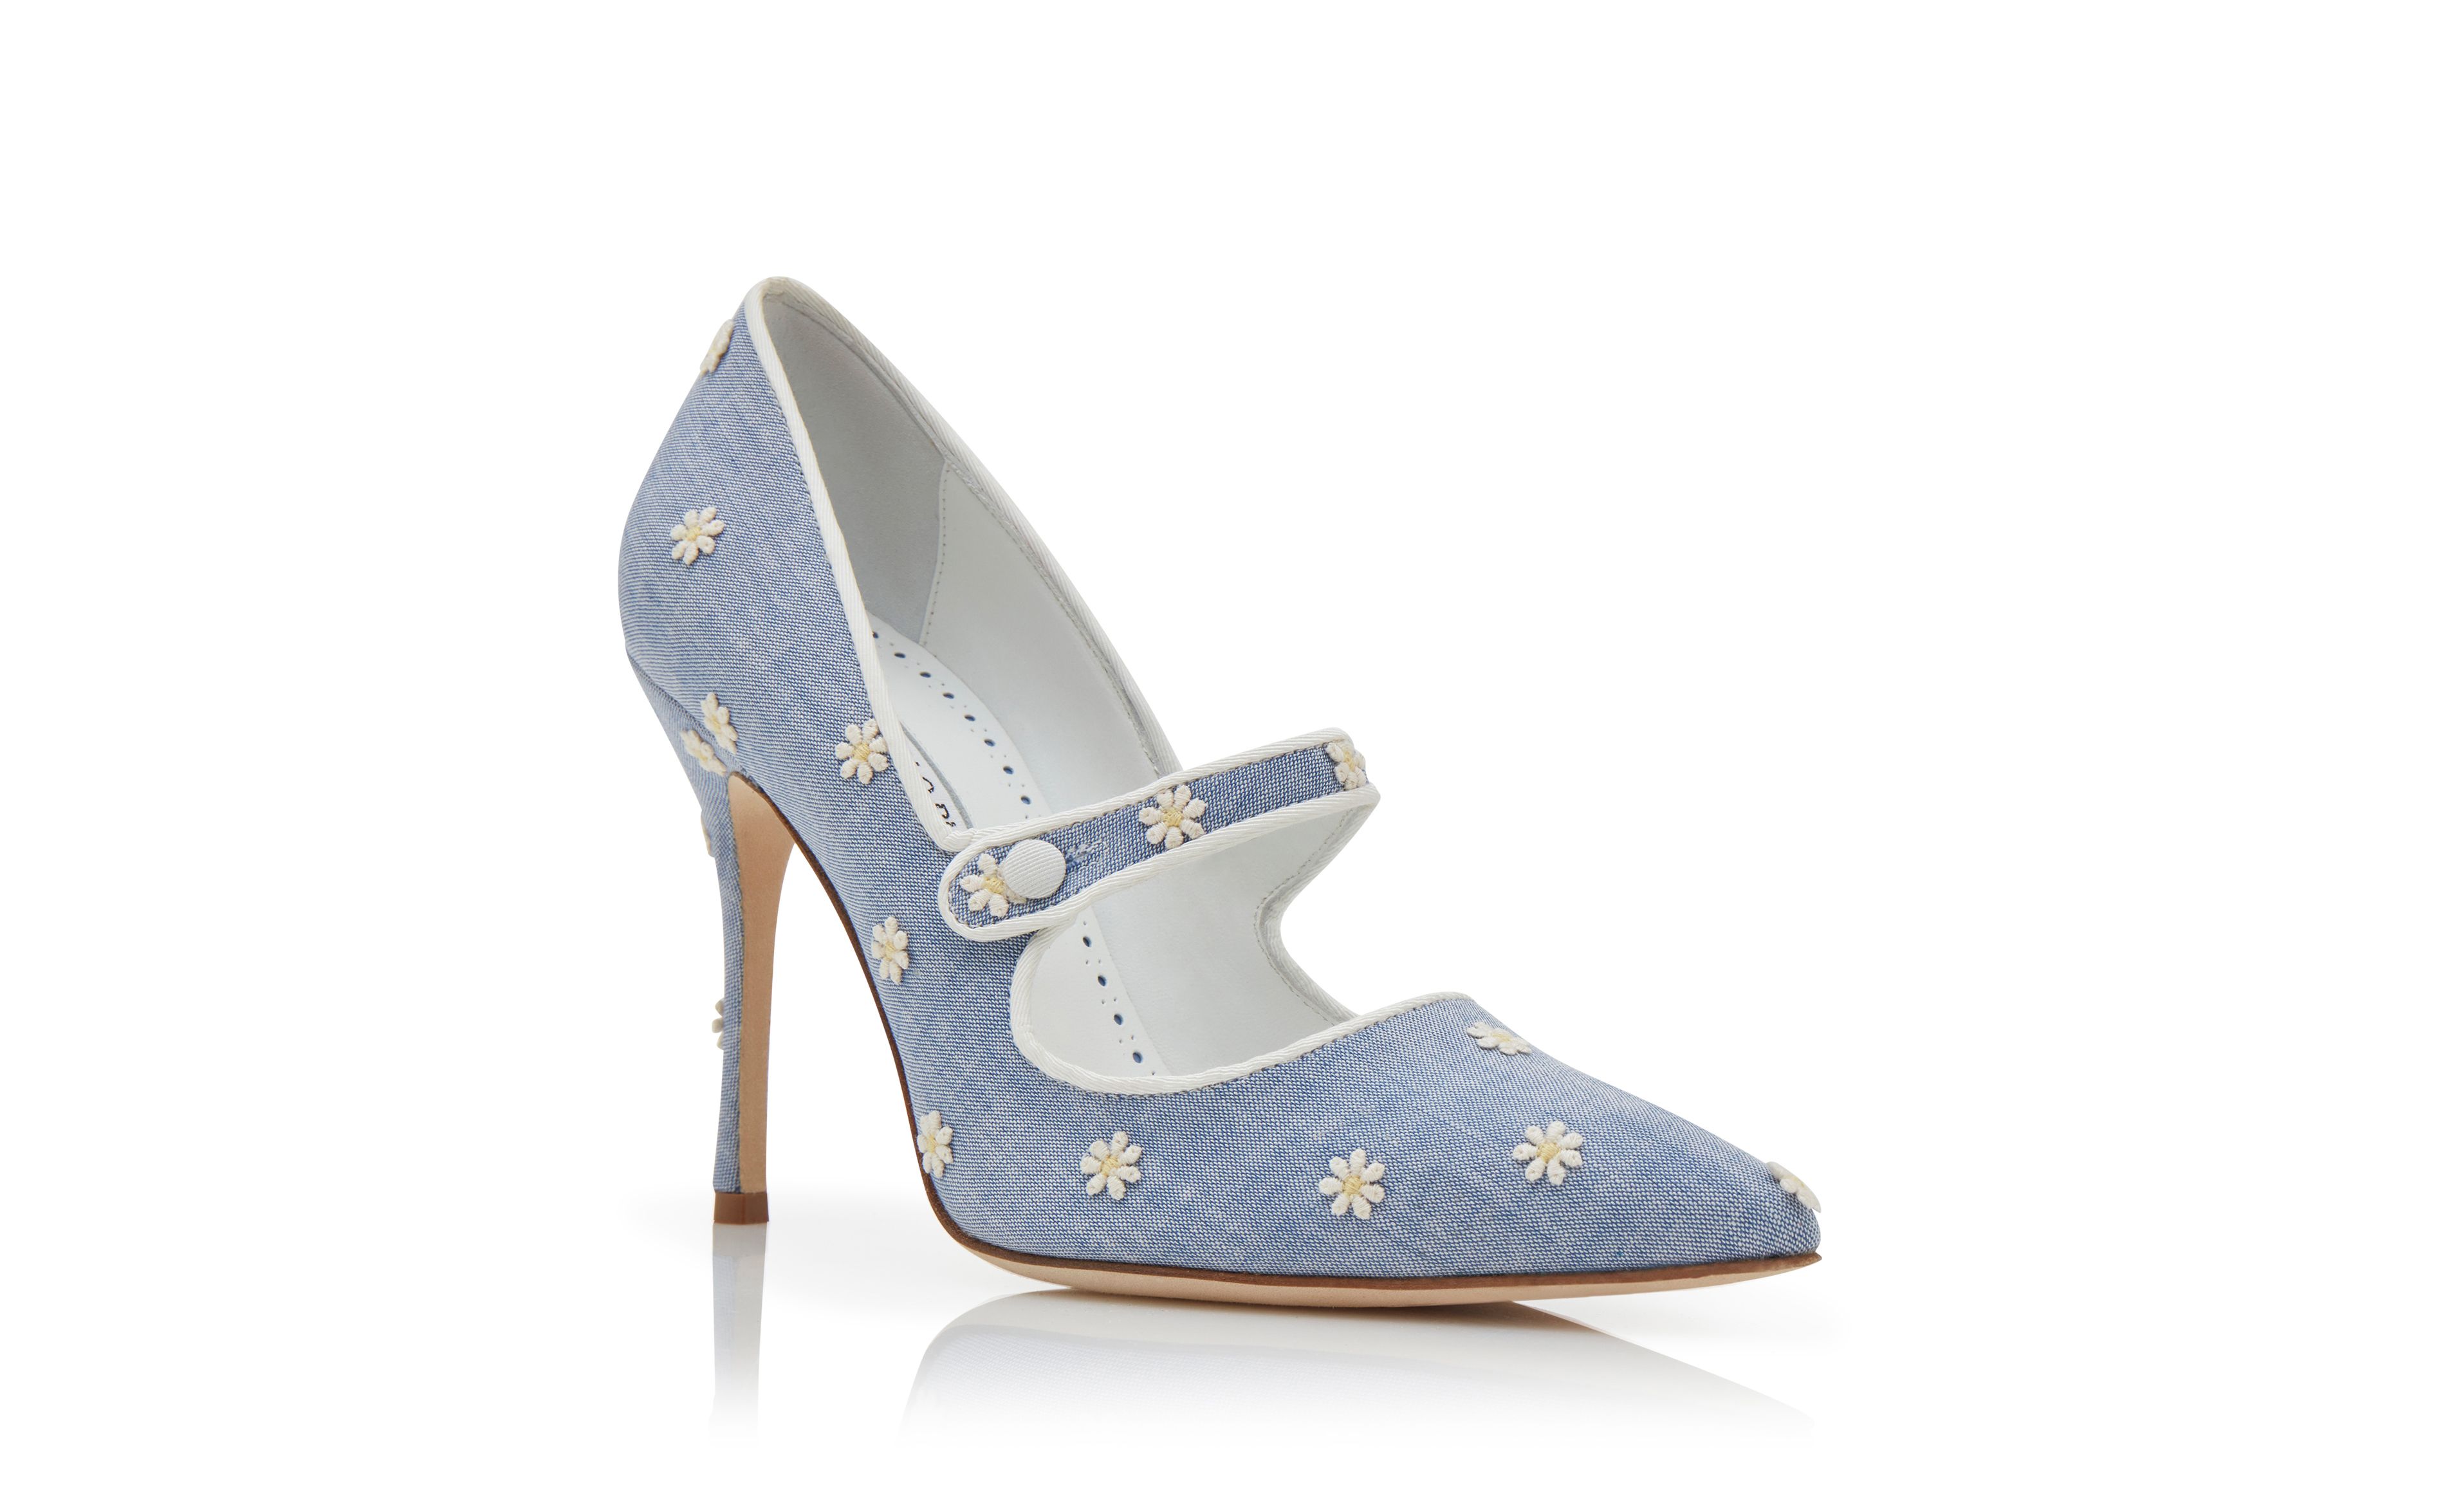 Designer Blue and White Chambray Daisy Pumps - Image Upsell